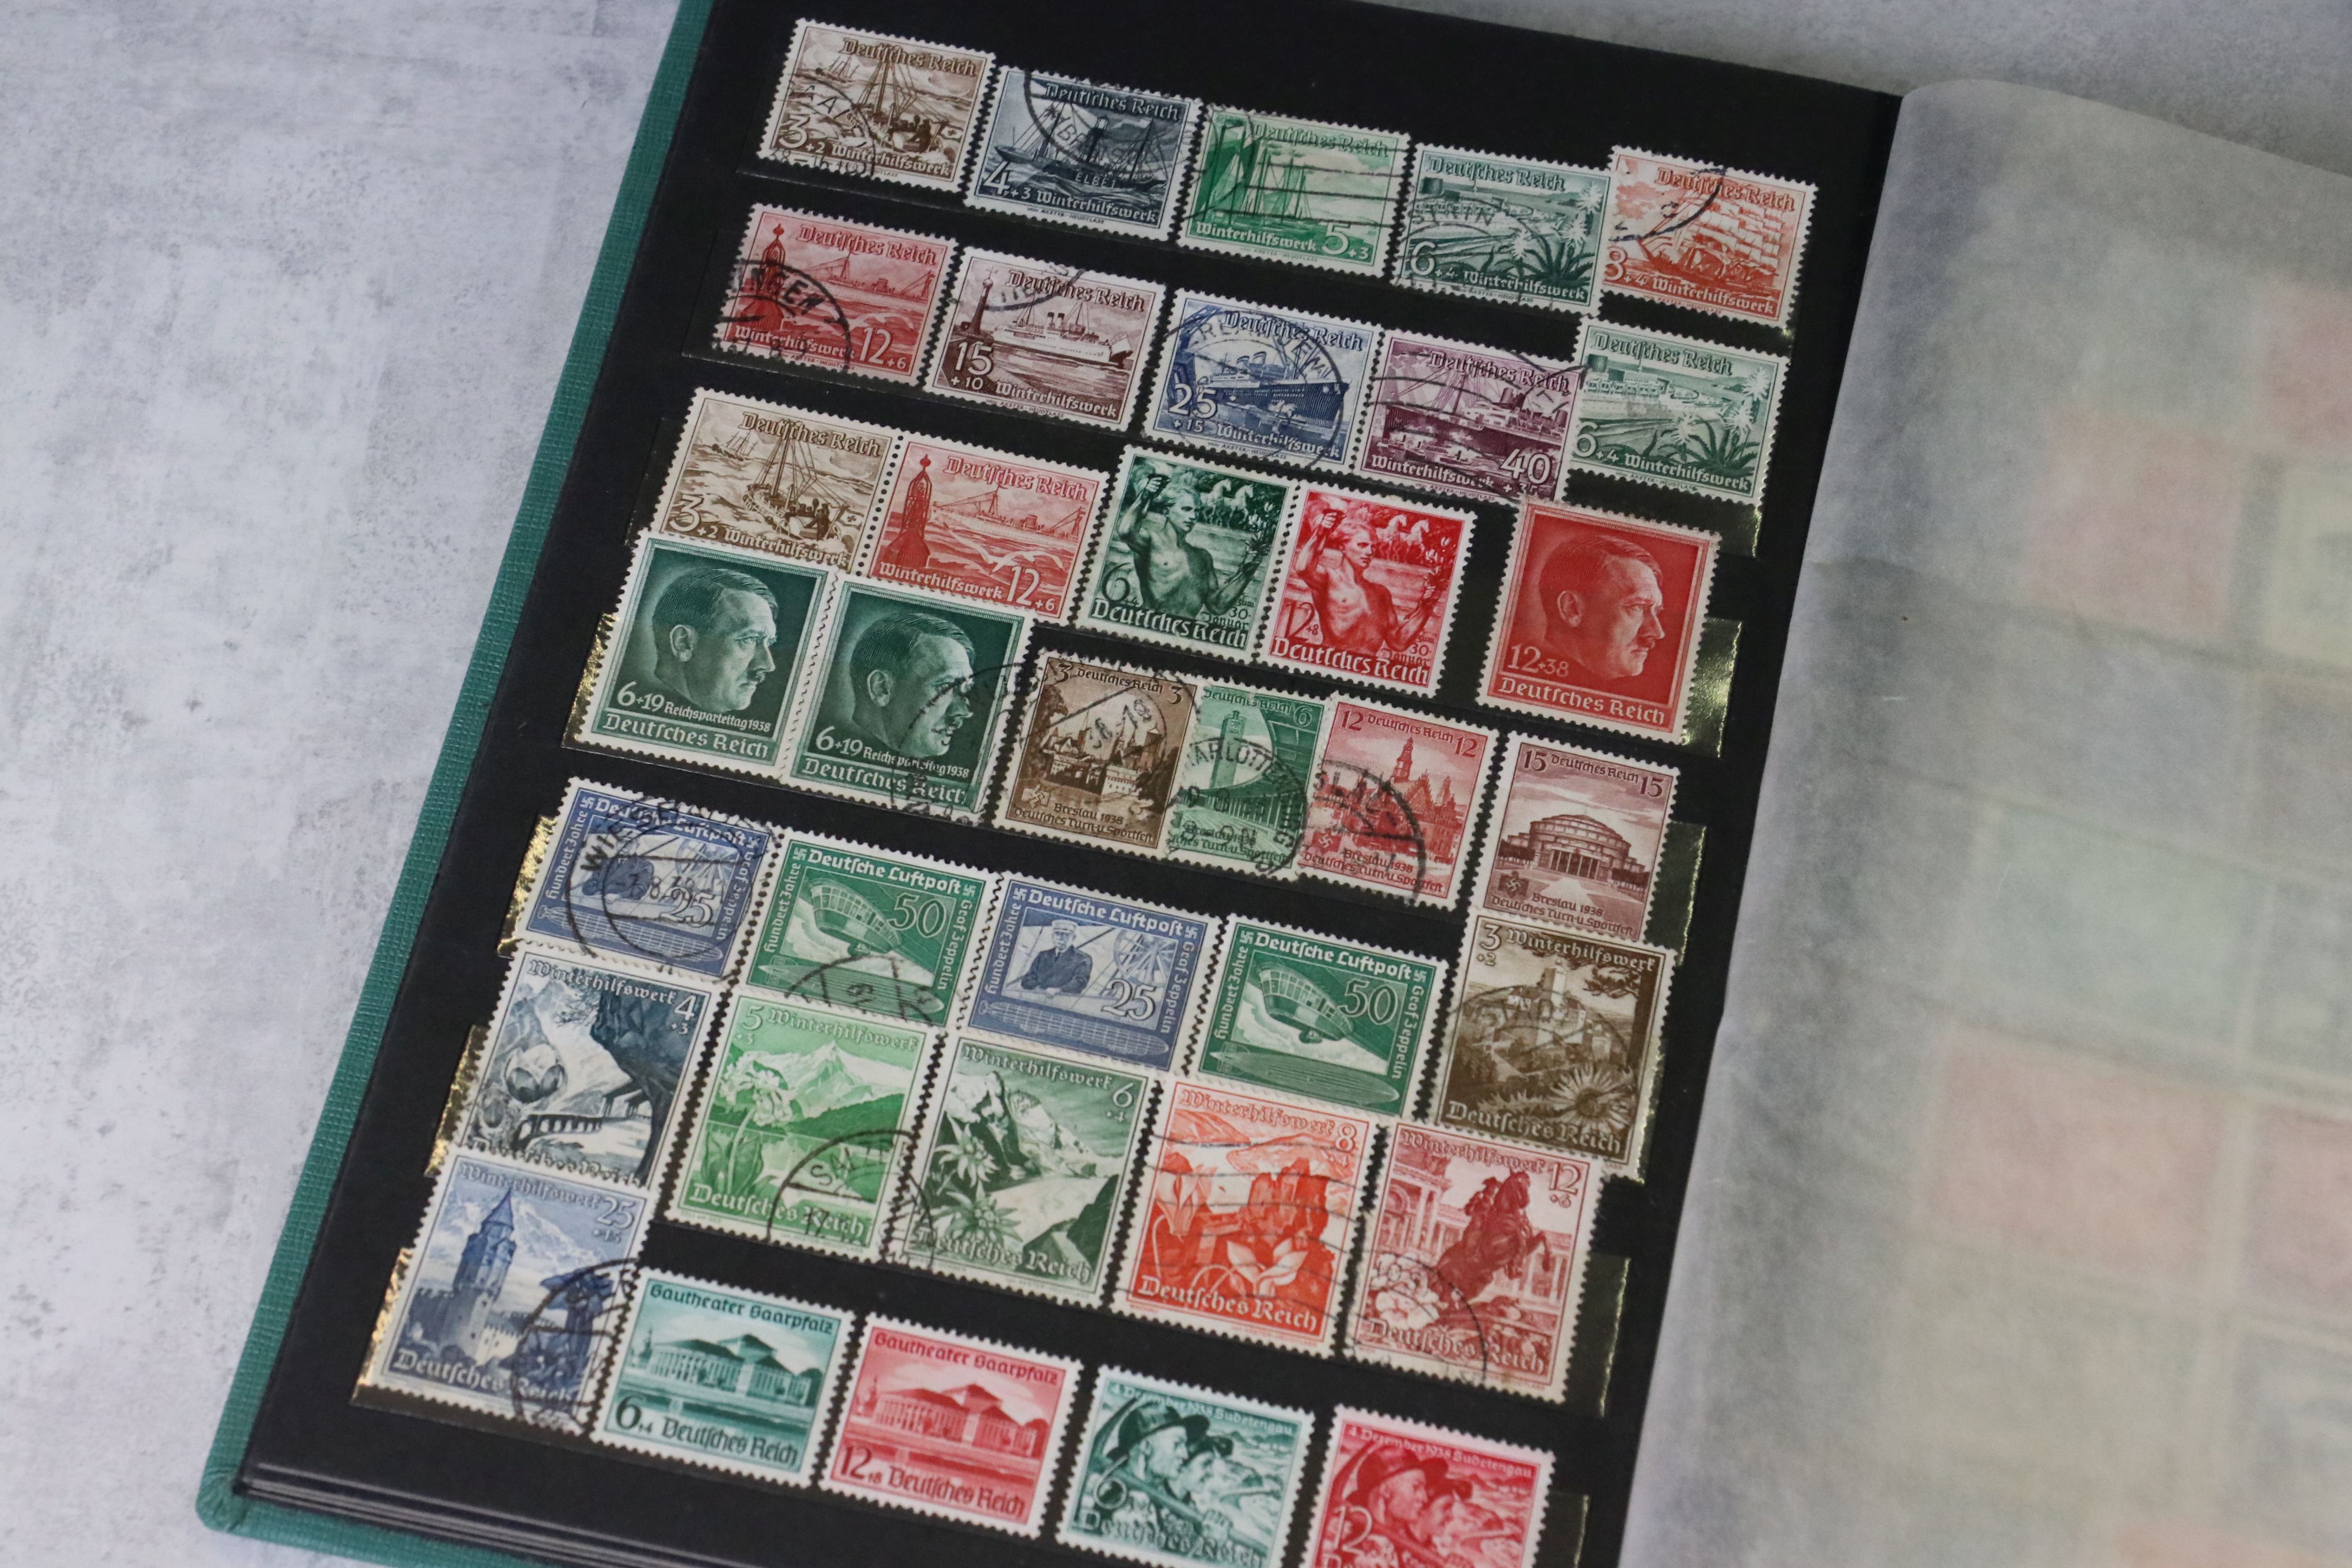 A Large Concise Collection Of World War One And World War Two German Stamps To Include Many Mint - Image 5 of 7